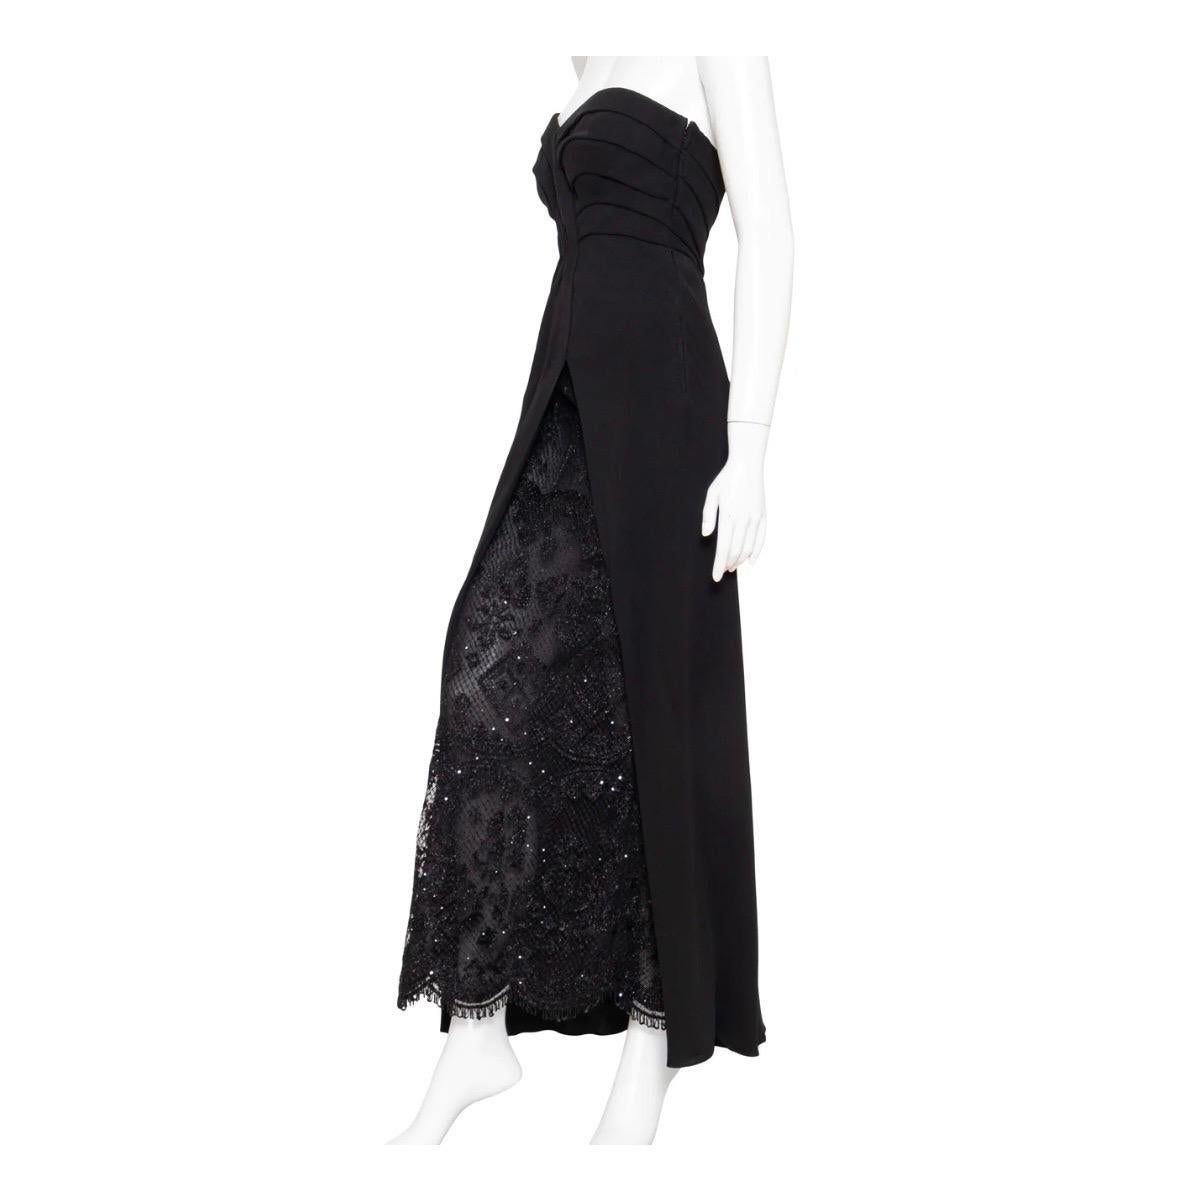 Haute Couture Strapless Silk and Lace Maxi Gown by Valentino
Solid Black
Sweetheart neckline
Draped and pleated bodice
Embroidered and sequin embellished tulle; semi-sheer panel on leg﻿
Beaded fringe on tulle portion
Corset boning with additional